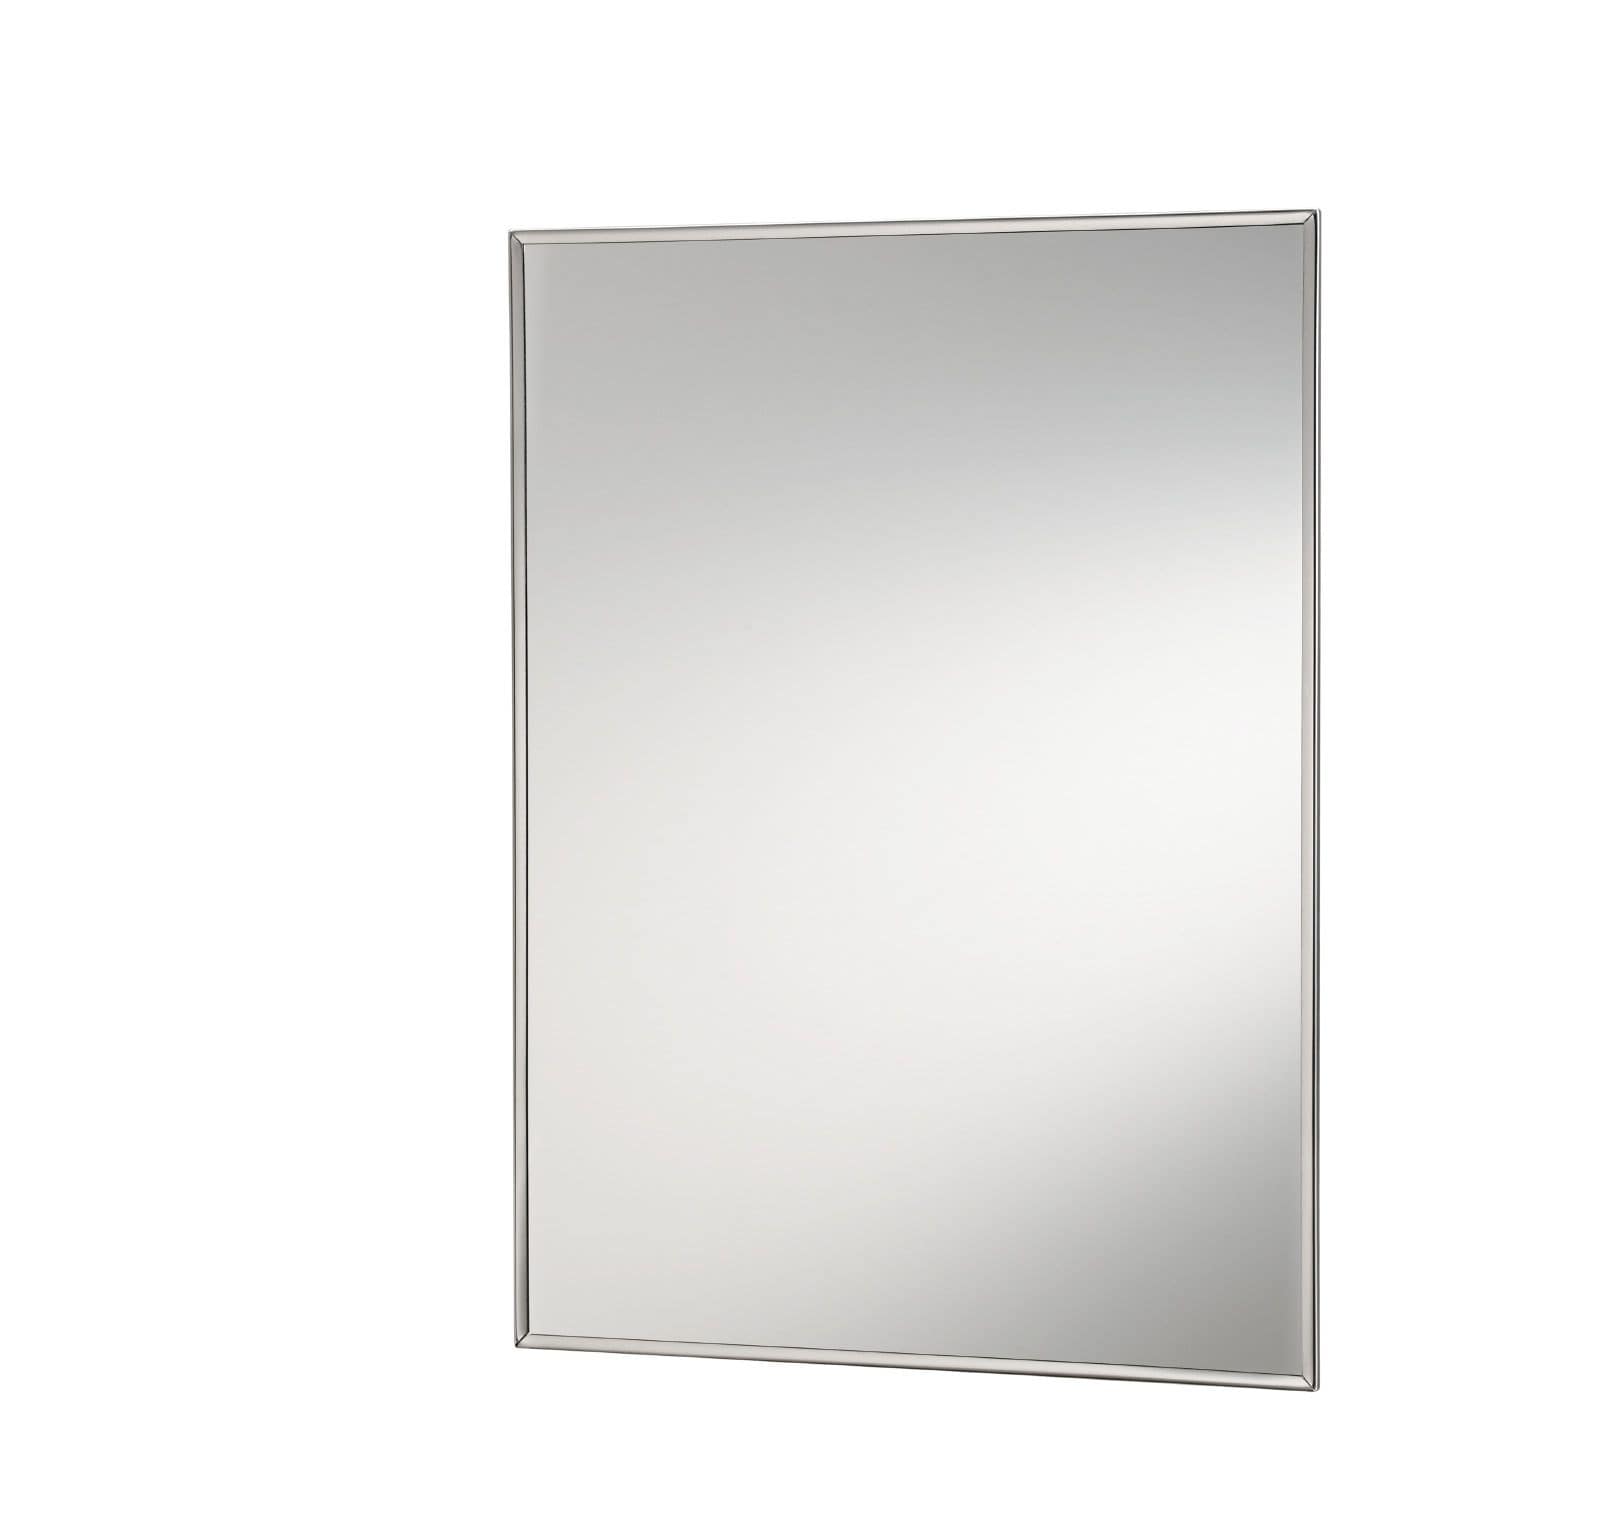 Recessed Medicine Cabinet in Stainless Steel | 14 x 24